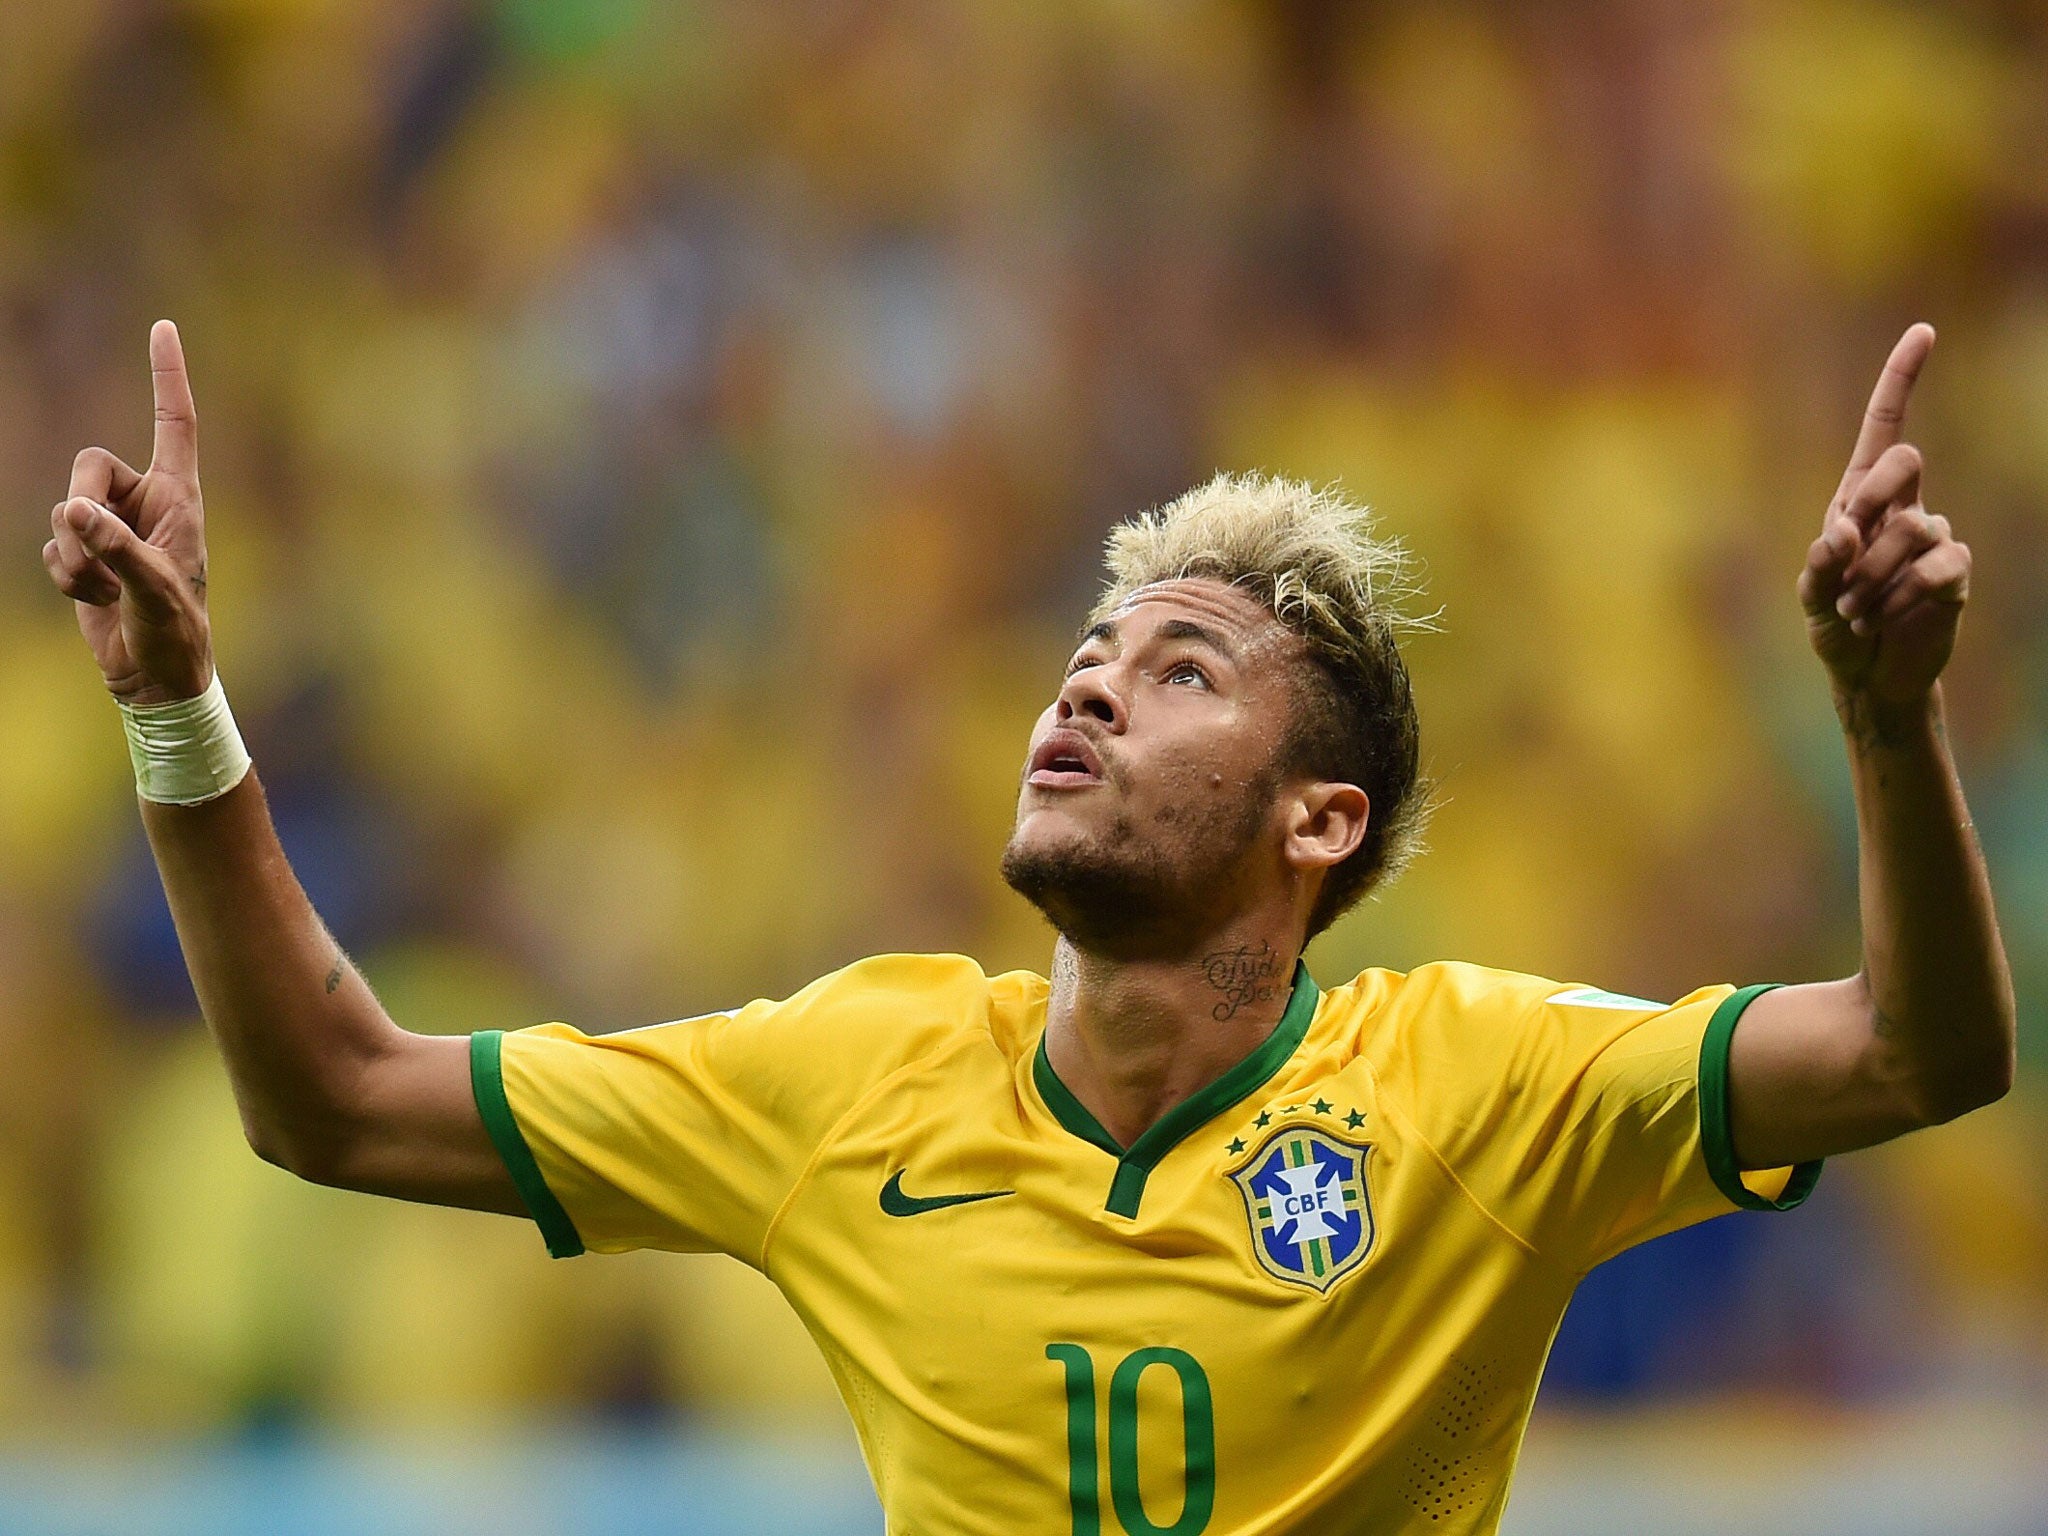 Neymar is arguably the player with the most pressure on his shoulders at the World Cup